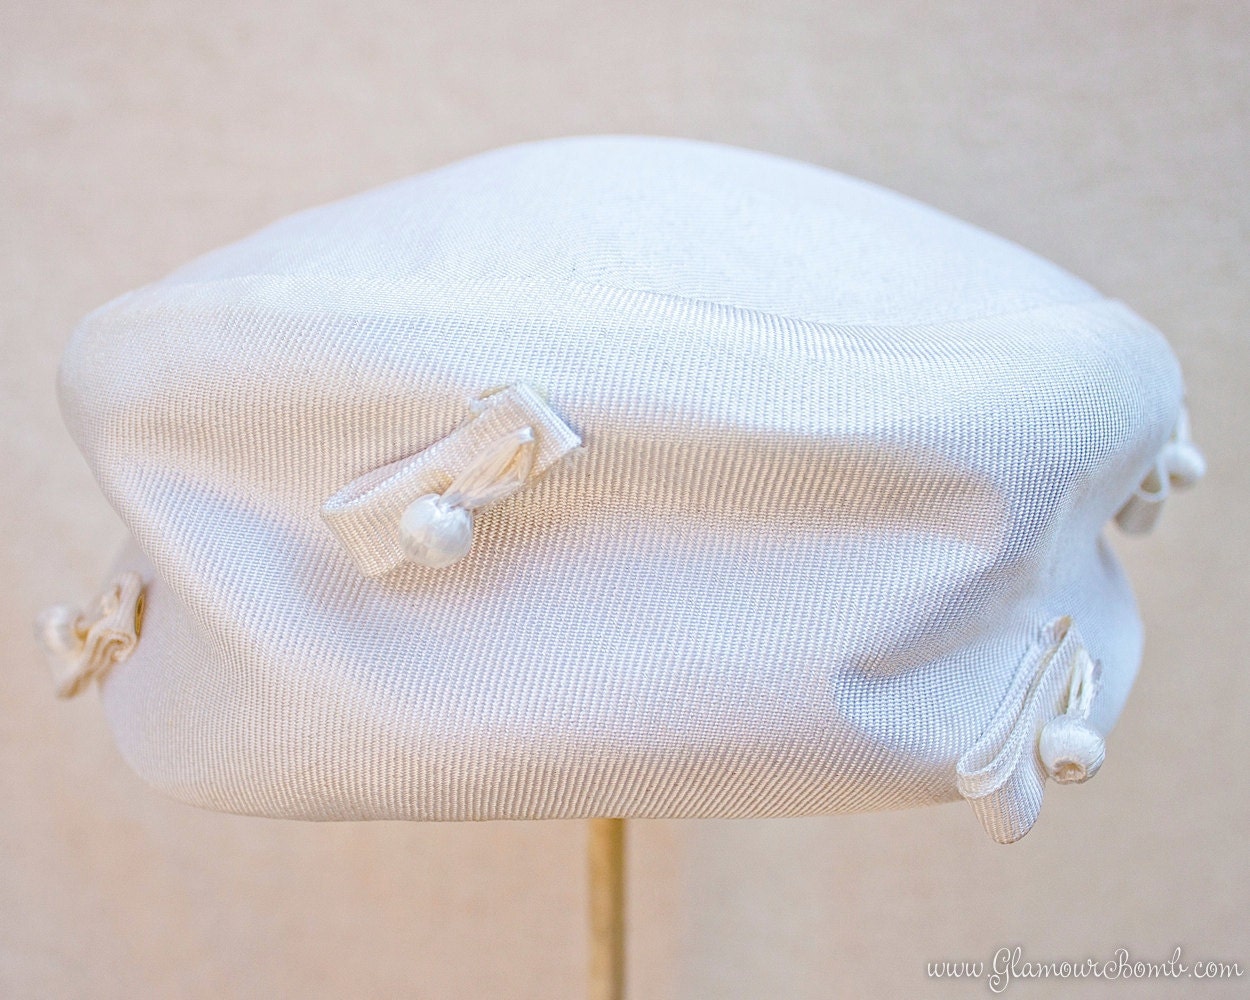 Lord and Taylor Vintage Pillbox Hat Circa 1960s